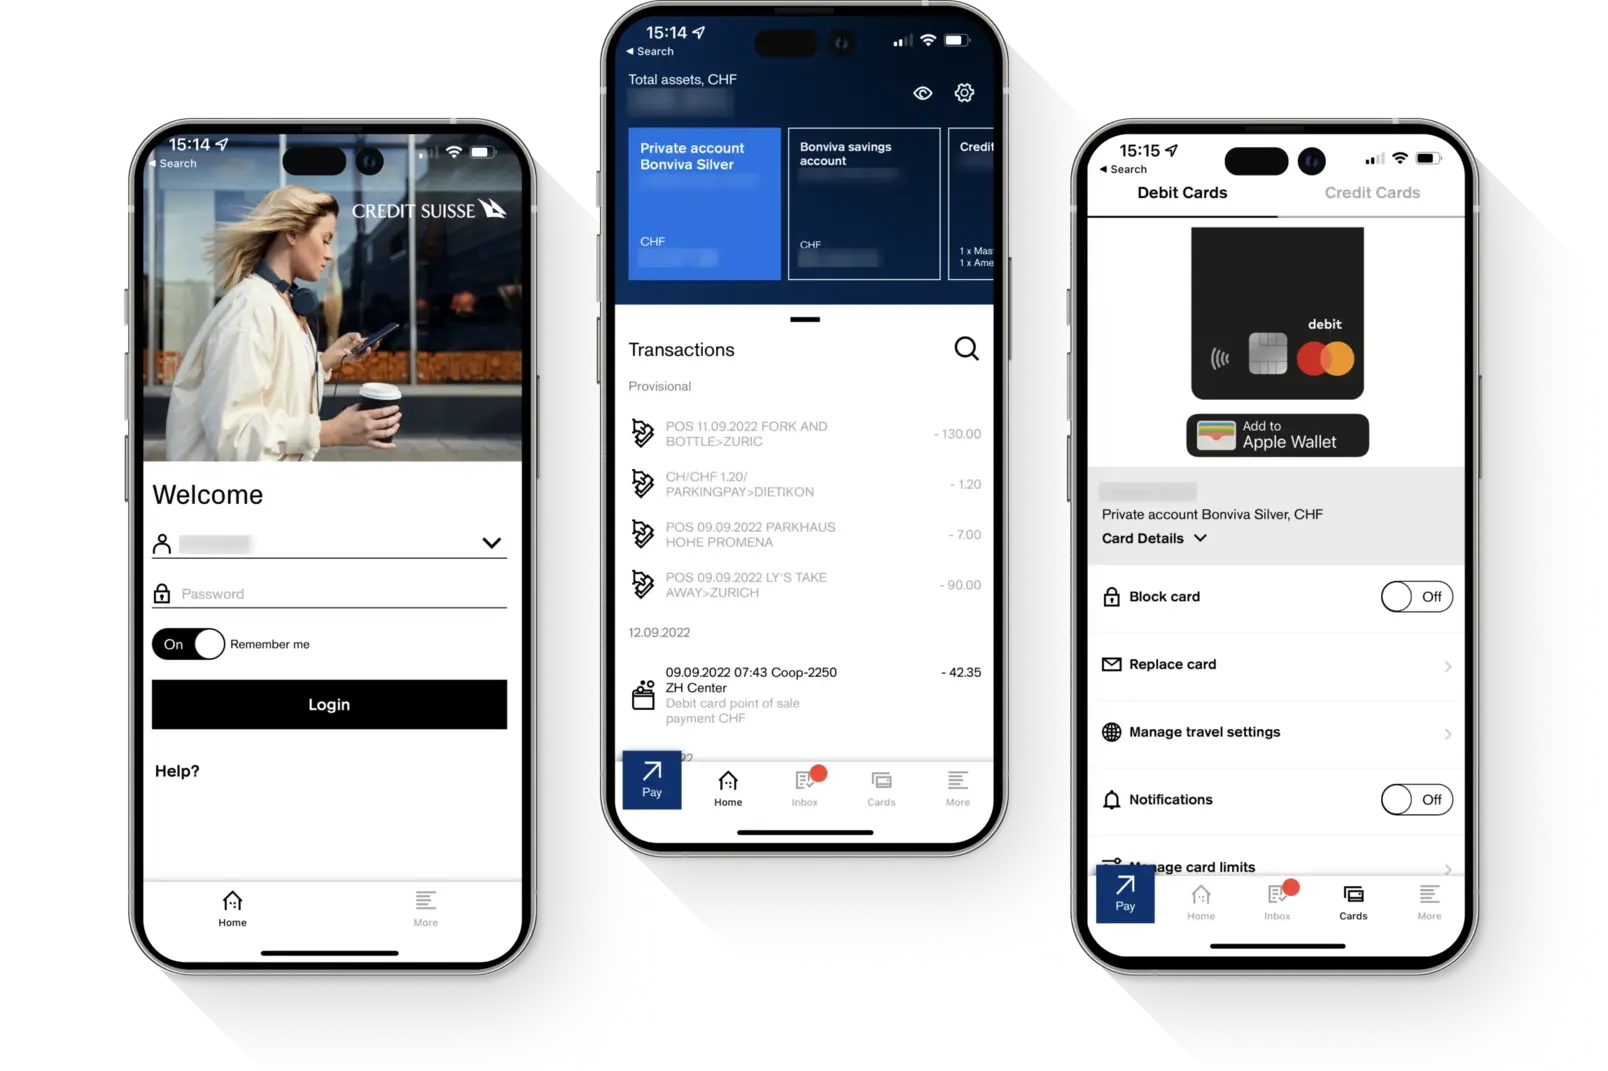 Redesign of the mobile banking experience